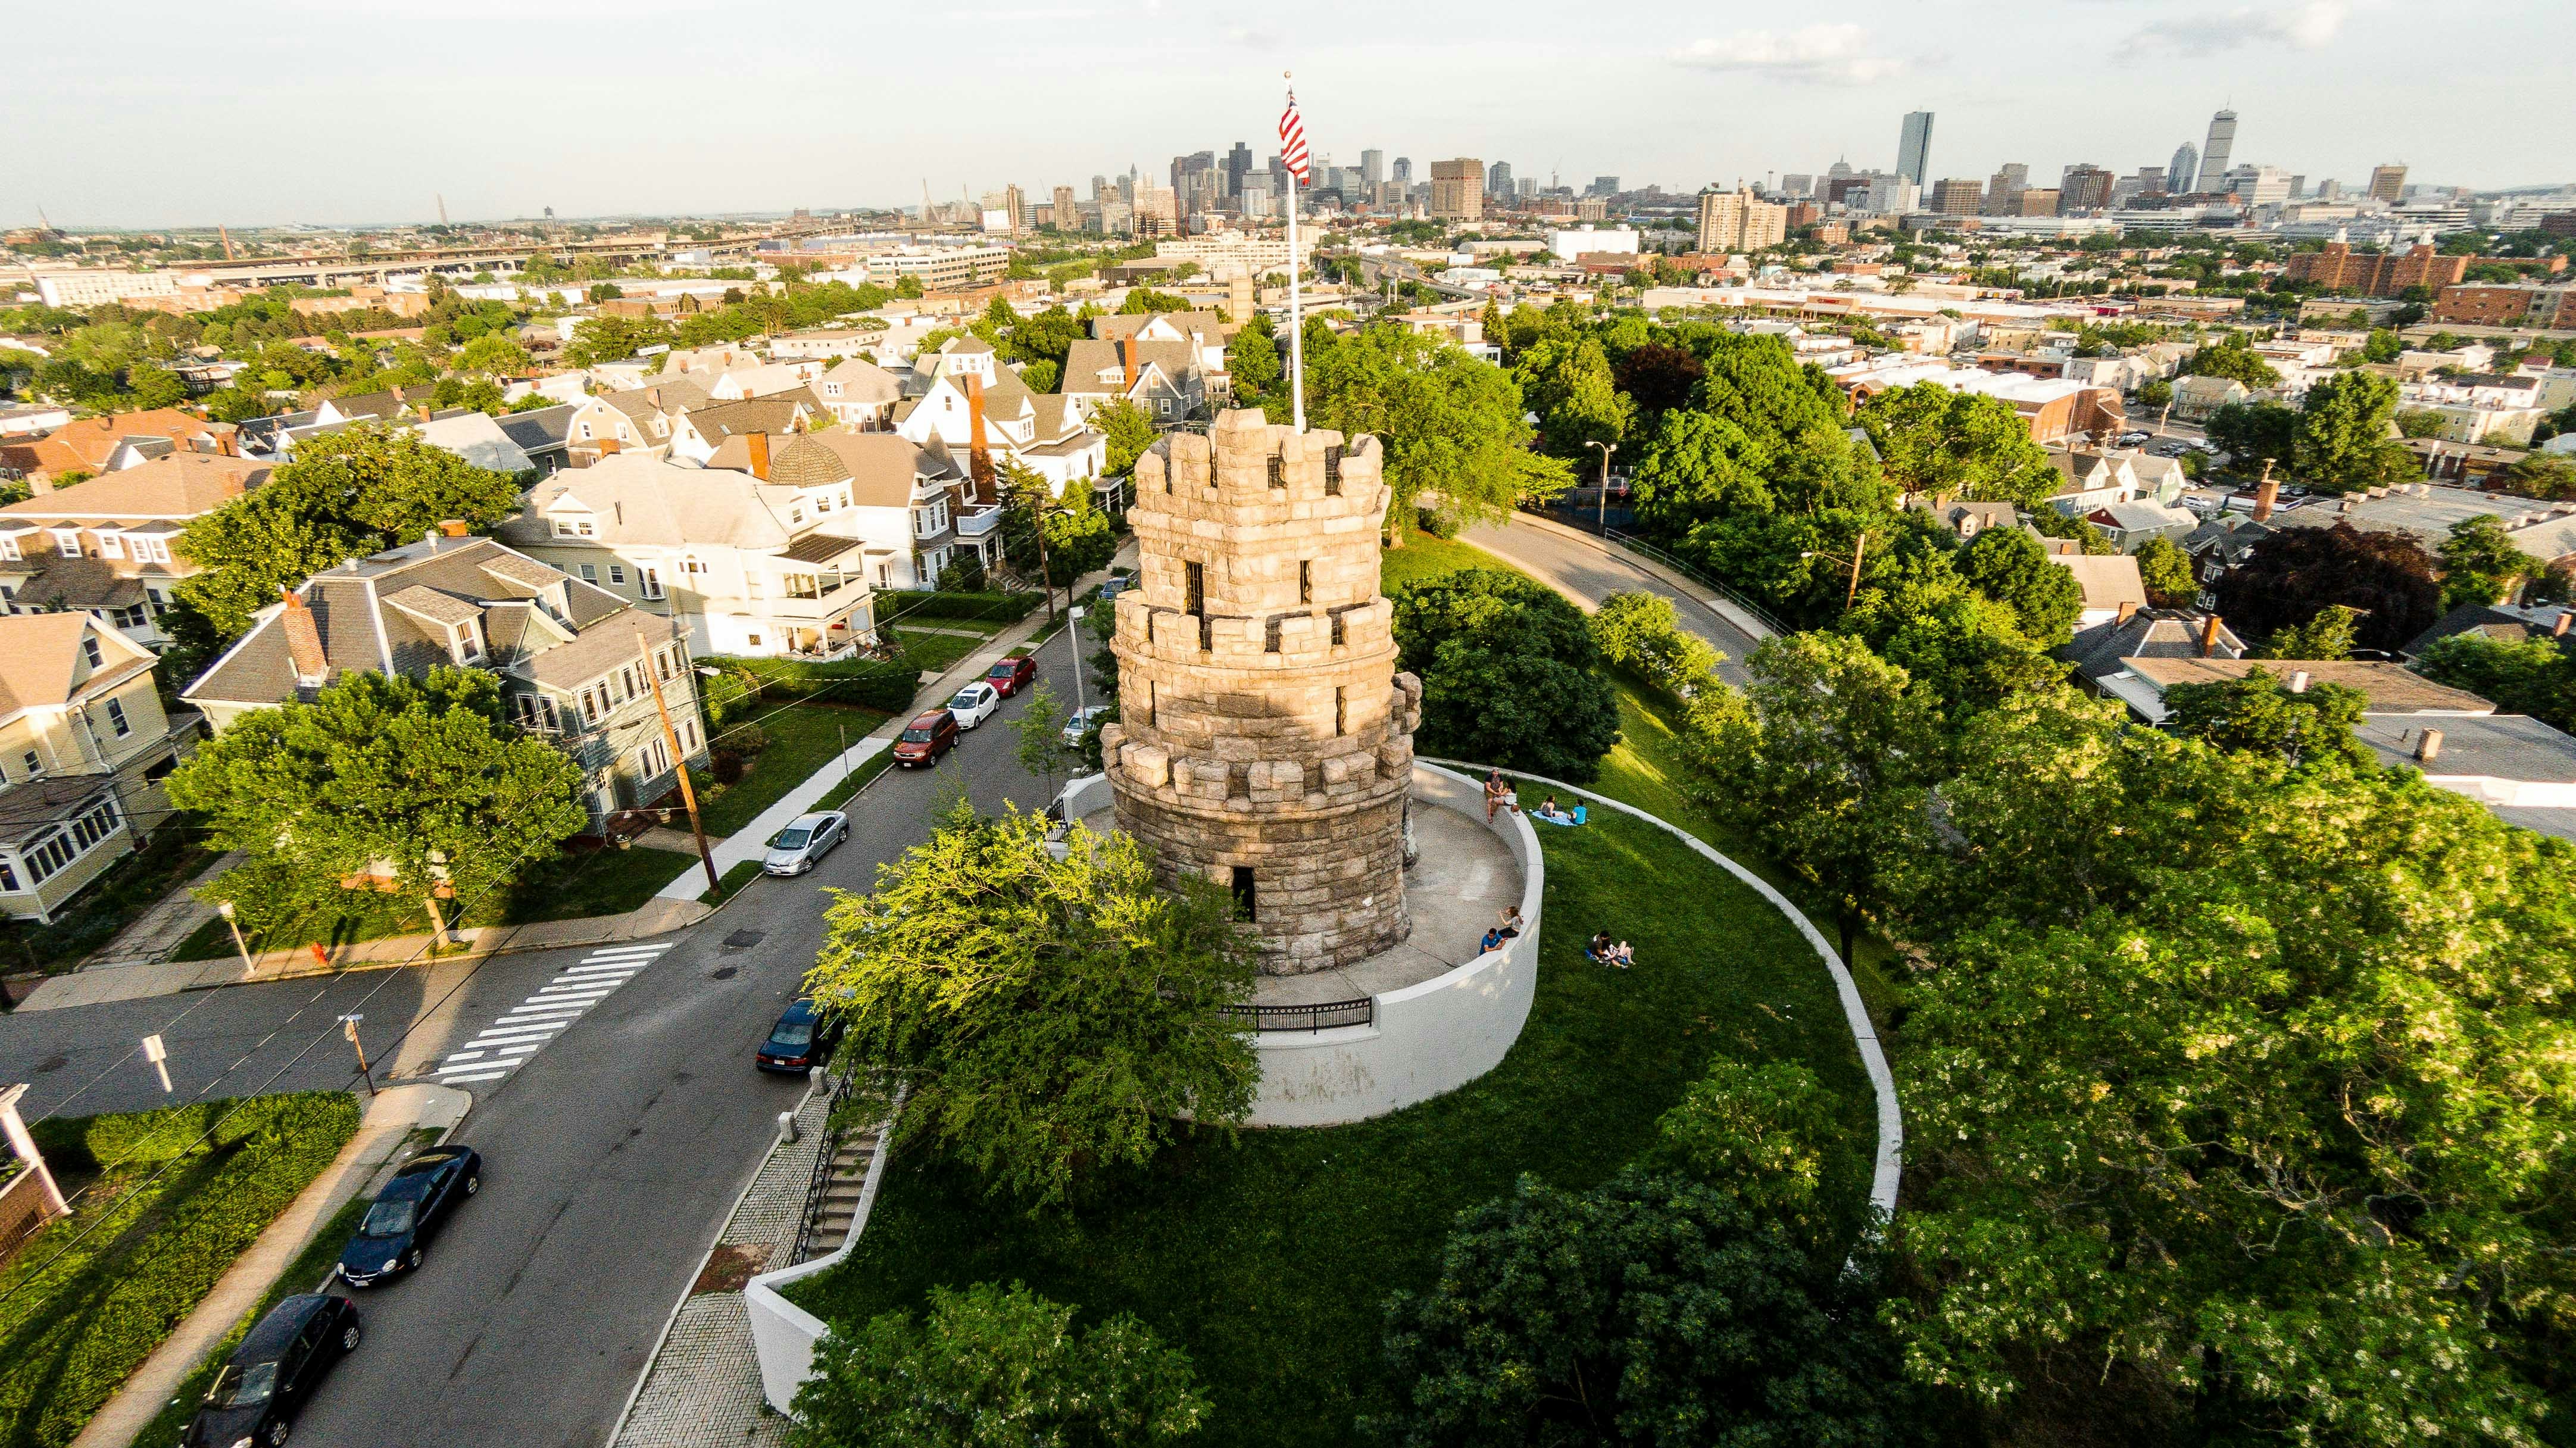 Prospect Hill Tower in Somerville with a view of the Boston skyline. Image by Eric Kilby / CC BY-SA 2.o